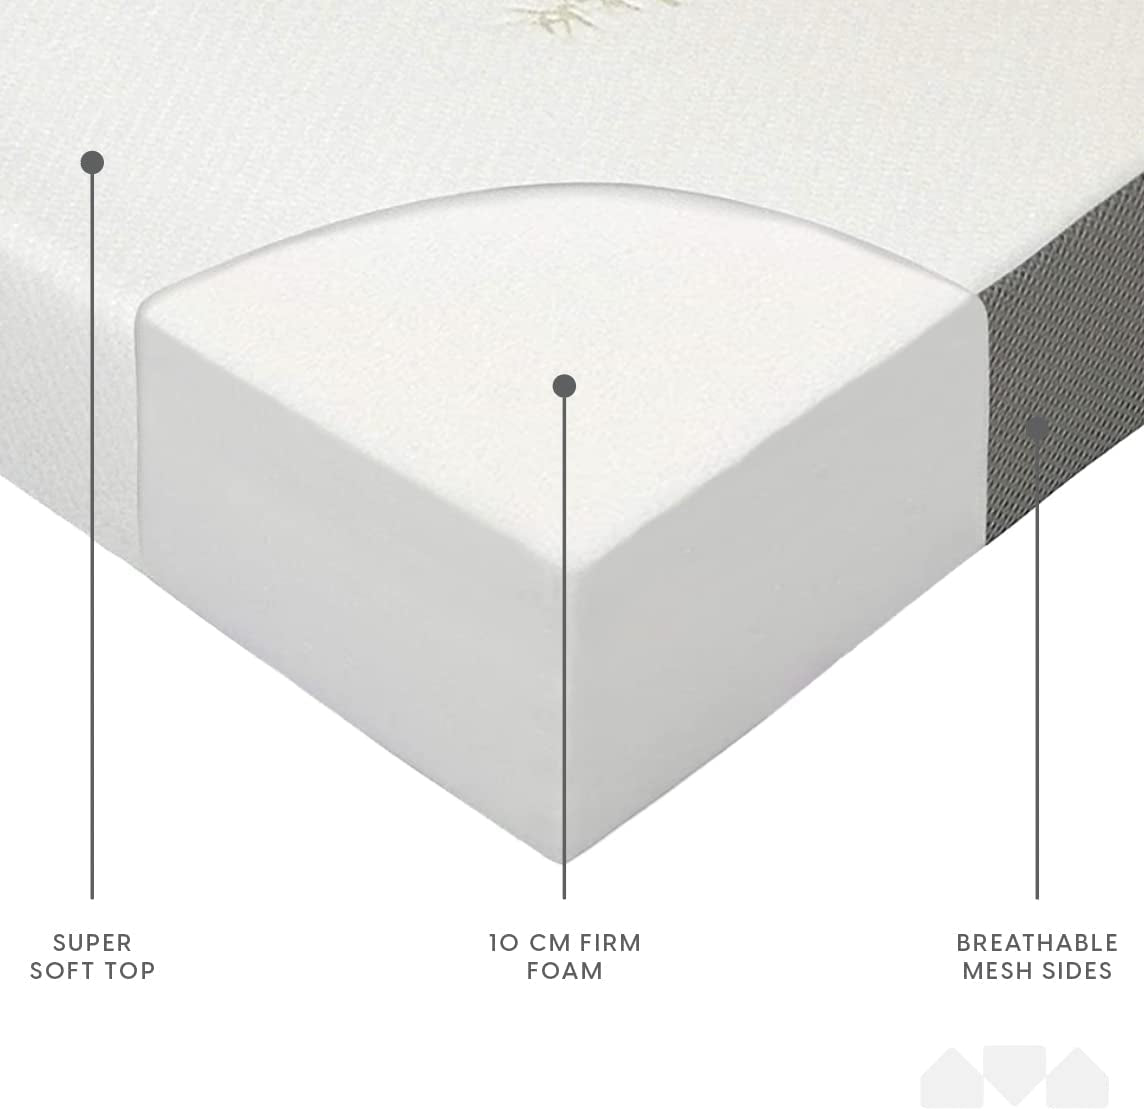 10Cm Thick Tri Folding Mattress/Tri Fold Guest Mattress with Ultra Soft Removable Cover with Non-Slip Bottom - Double (190Cm X 135Cm)